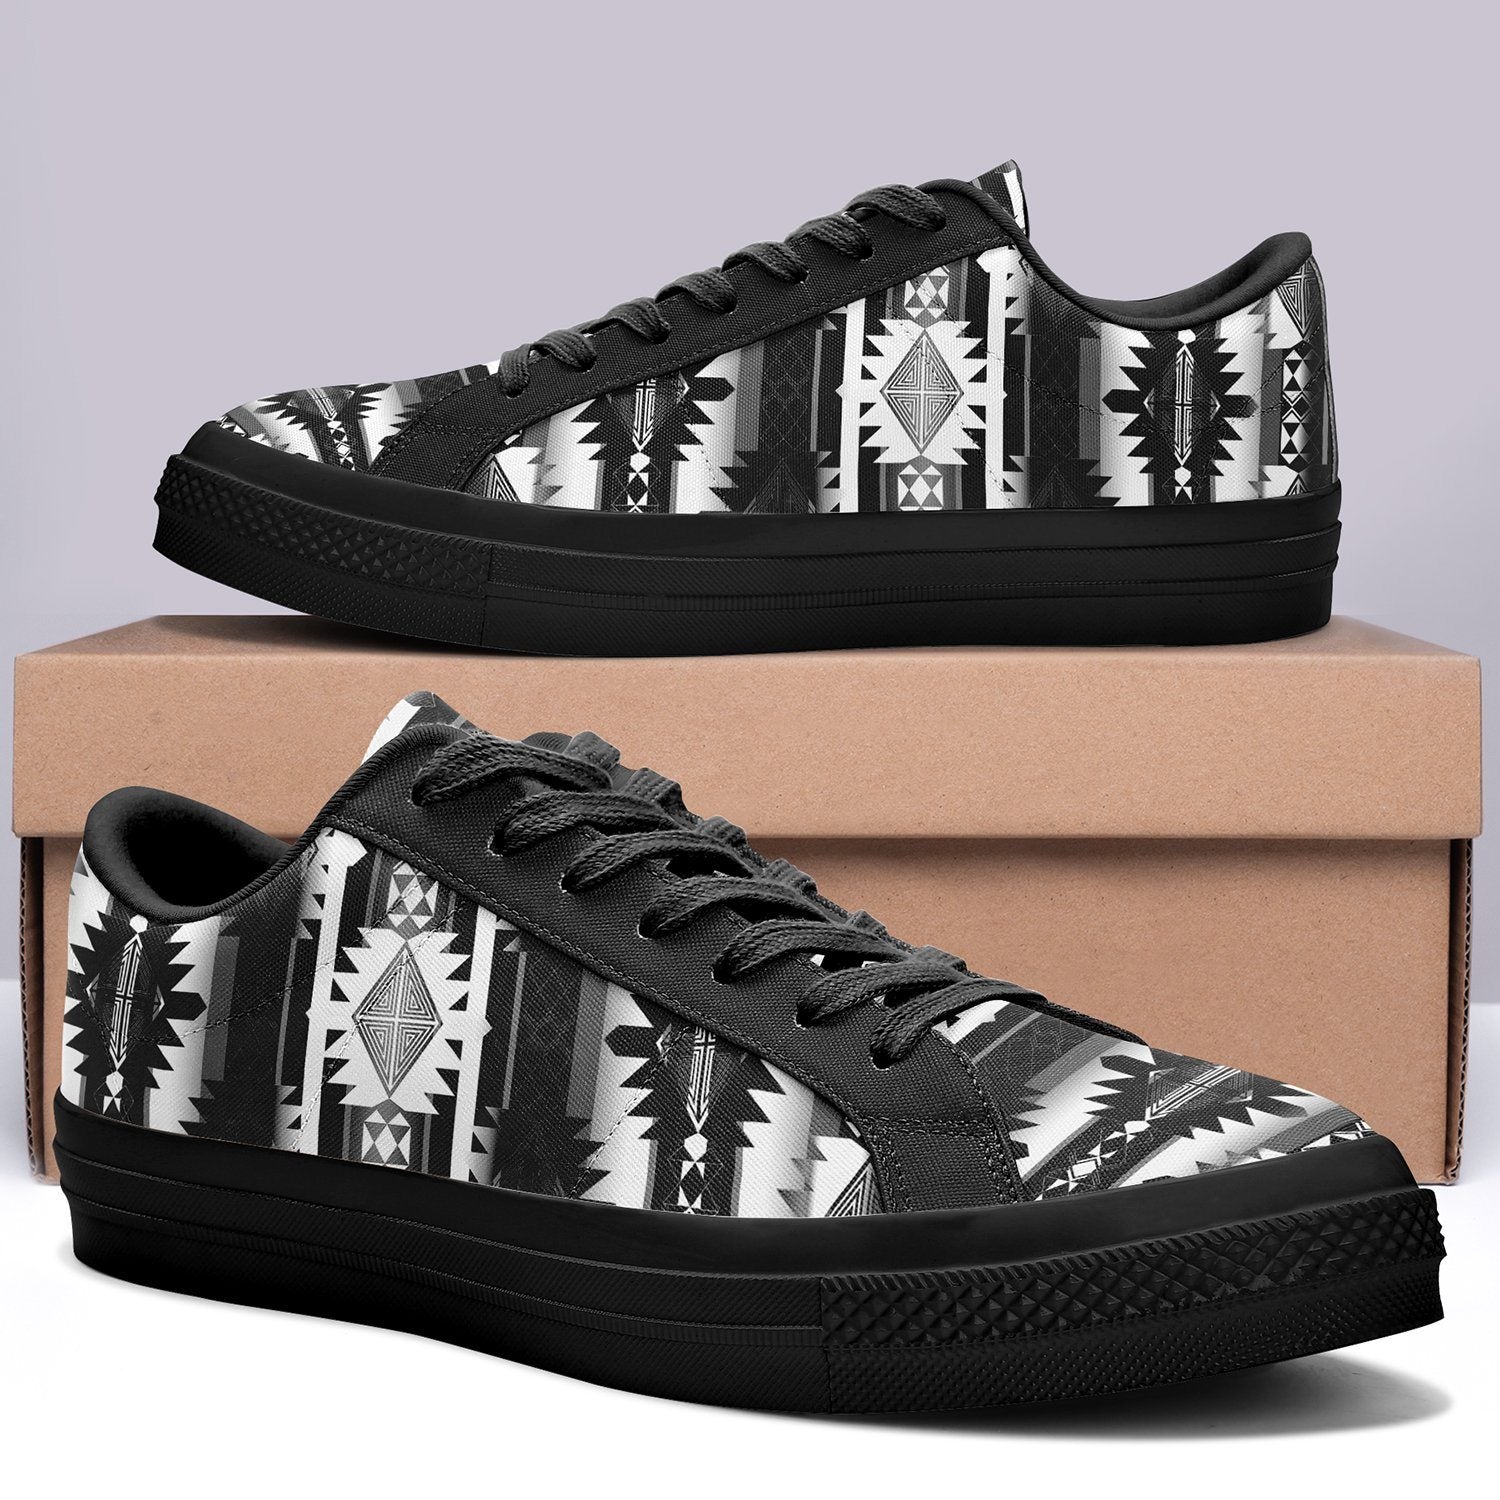 Okotoks Black and White Aapisi Low Top Canvas Shoes Black Sole 49 Dzine 